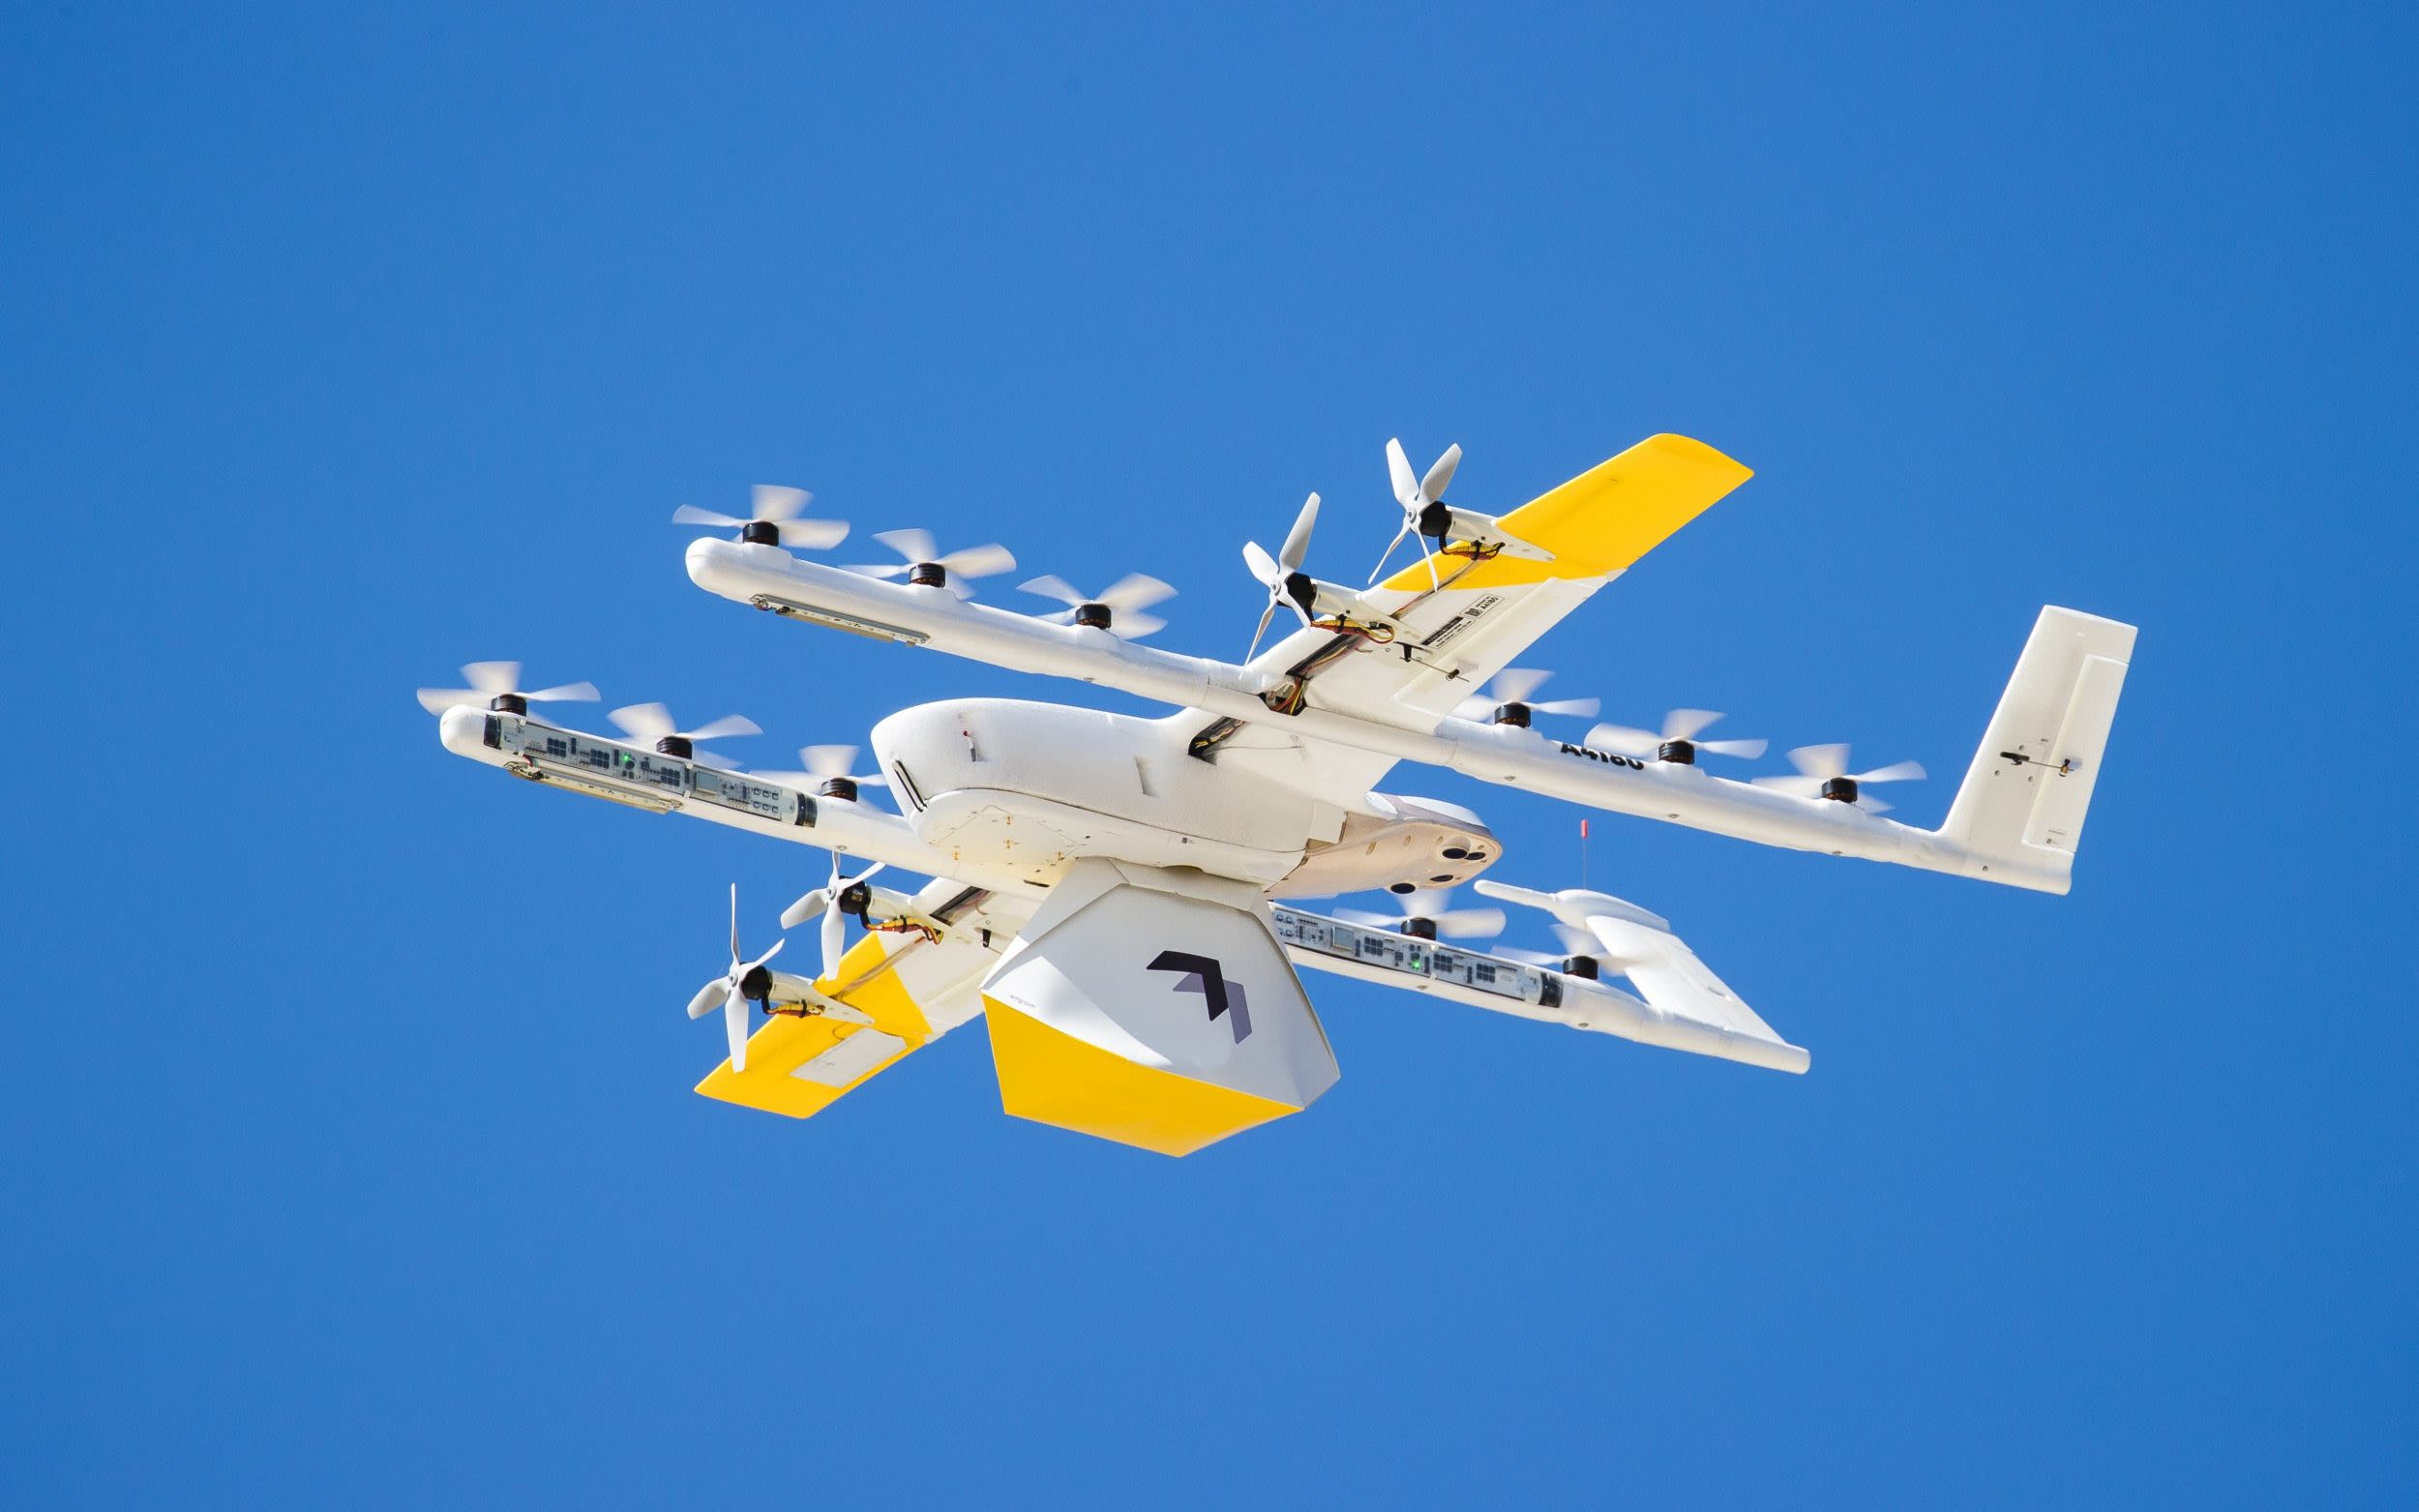 NHS to use Google drones to carry blood samples between London hospitals